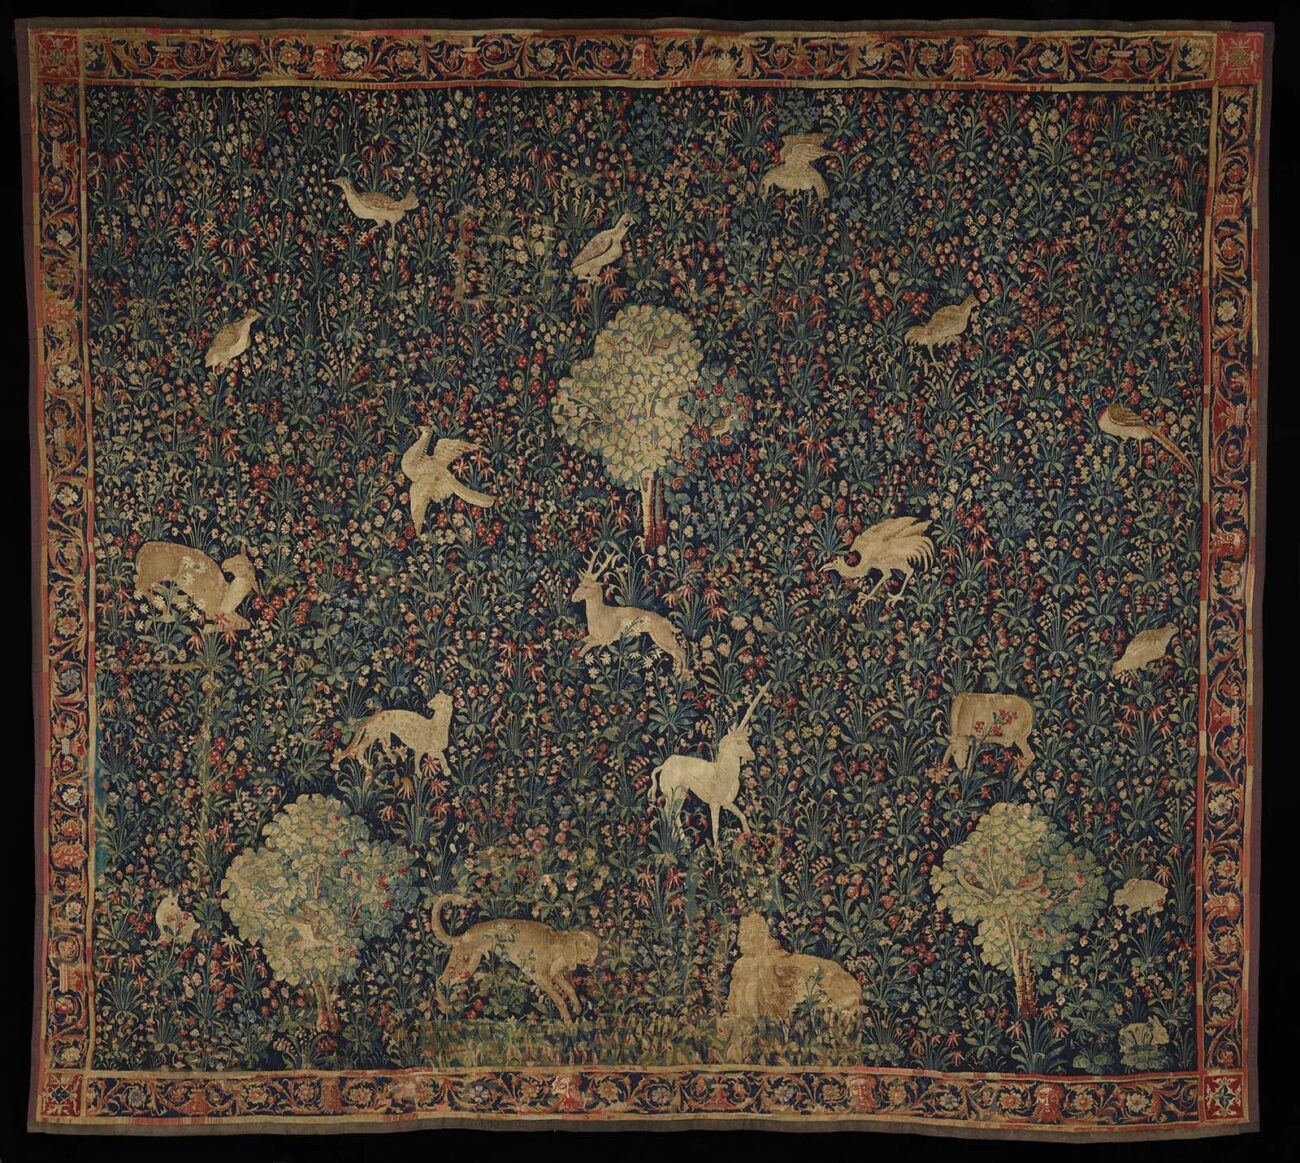 Tapestry with Flowers and Animals, about 1530–45, unknown creator, made in Belgium, wool, silk, tapestry weave, 11 ft. 6 7/8 in. x 13 ft. 1 3/4 inches (Minneapolis Institute of Art, Gift of Mrs. C.J. Martin in memory of Charles Jarius Martin, 34.4)